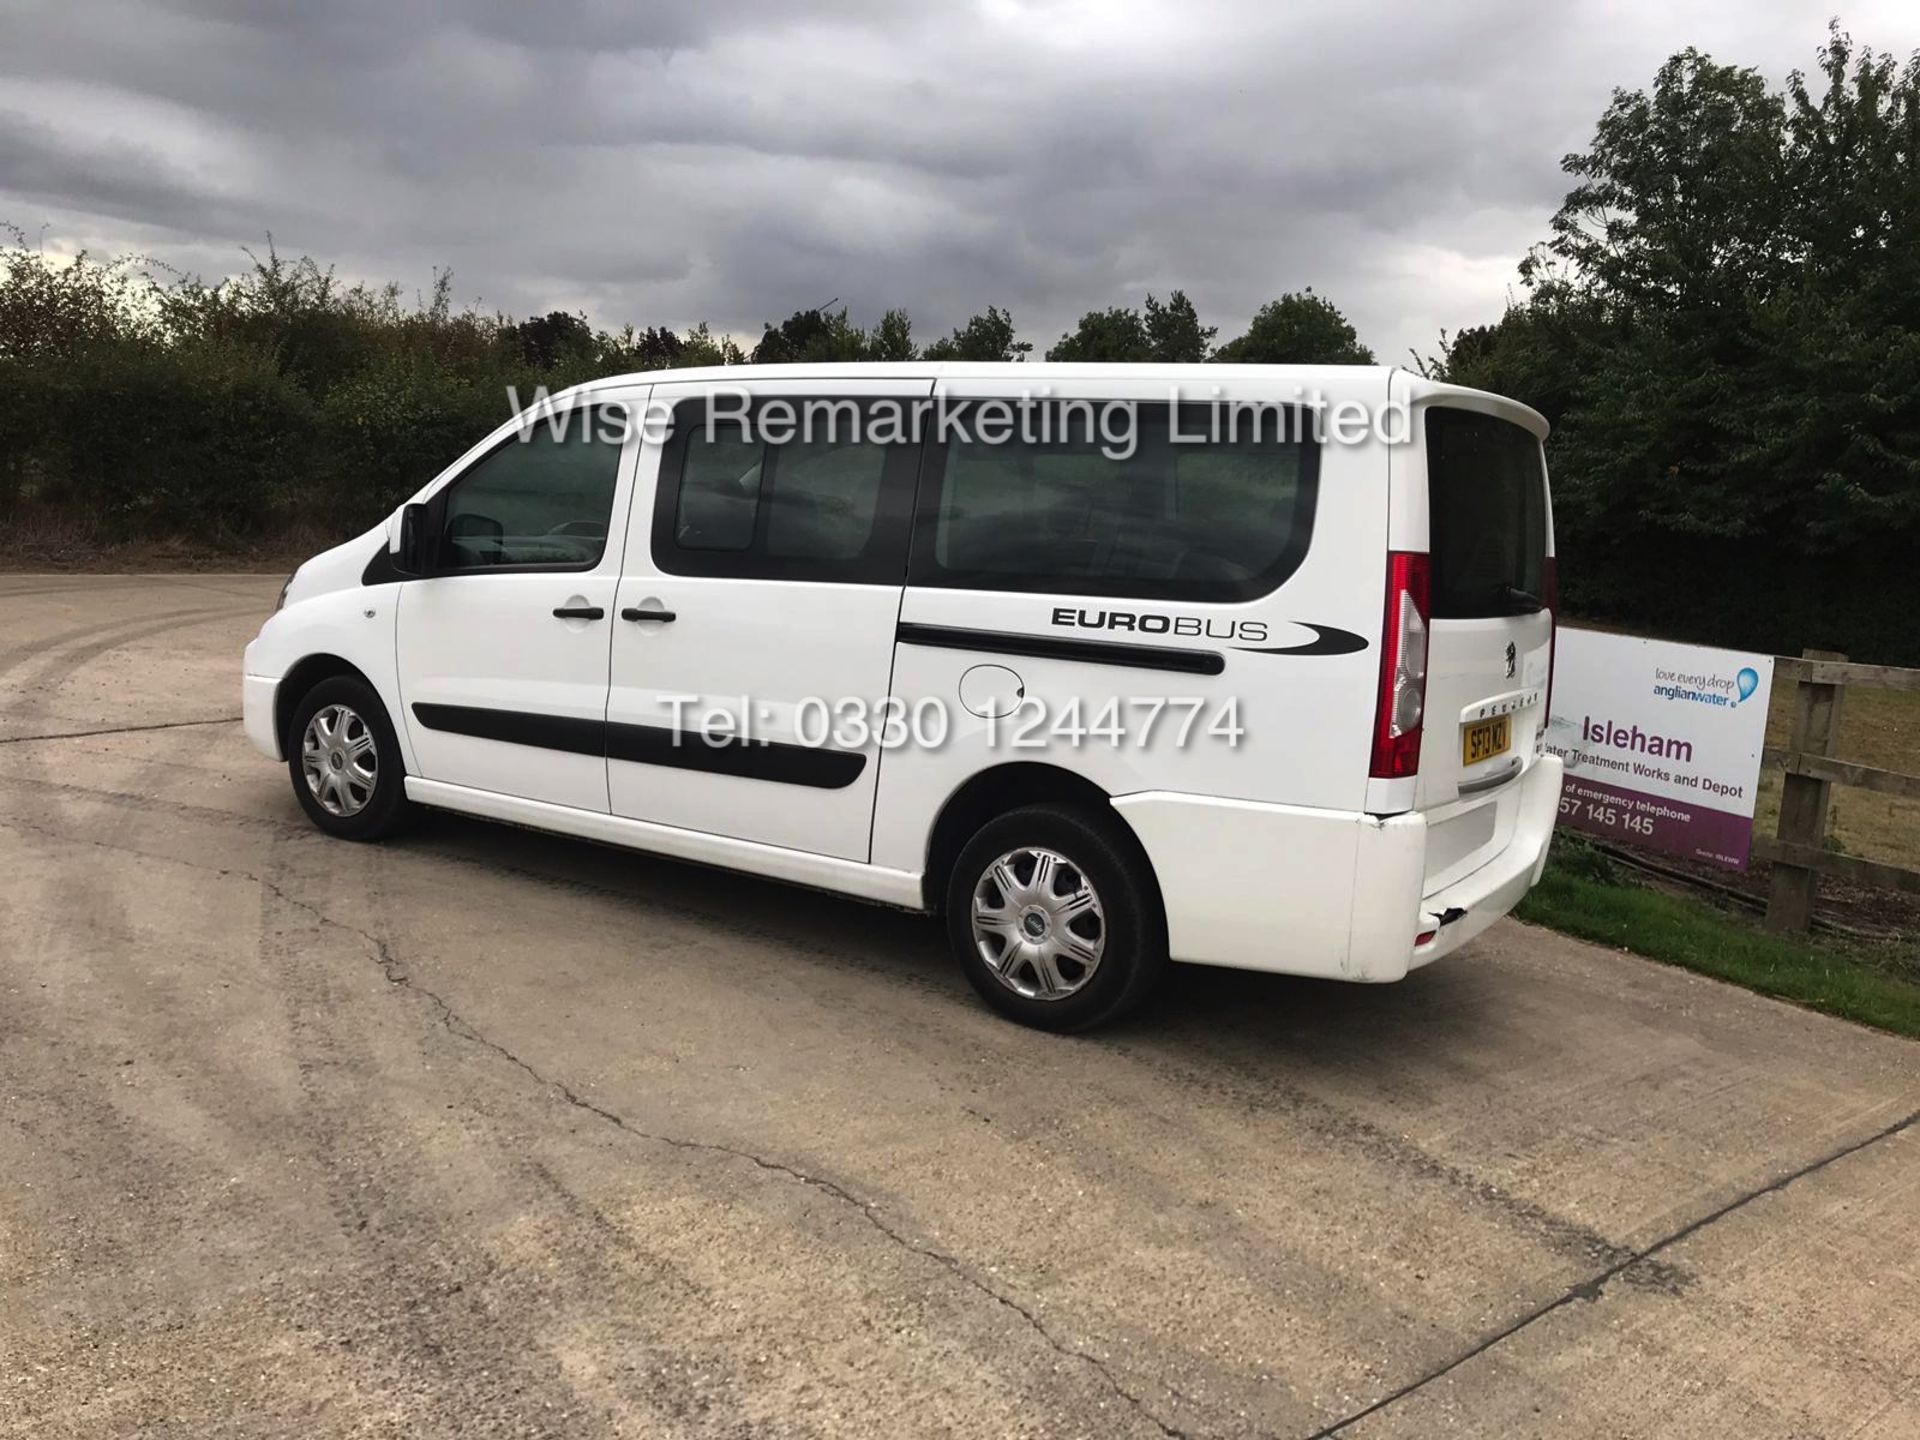 PEUGEOT EUROBUS S *MPV 8 SEATER* 2.0l (2013 - 13 REG) **AIR CON** - 1 OWNER FROM NEW - Image 2 of 19